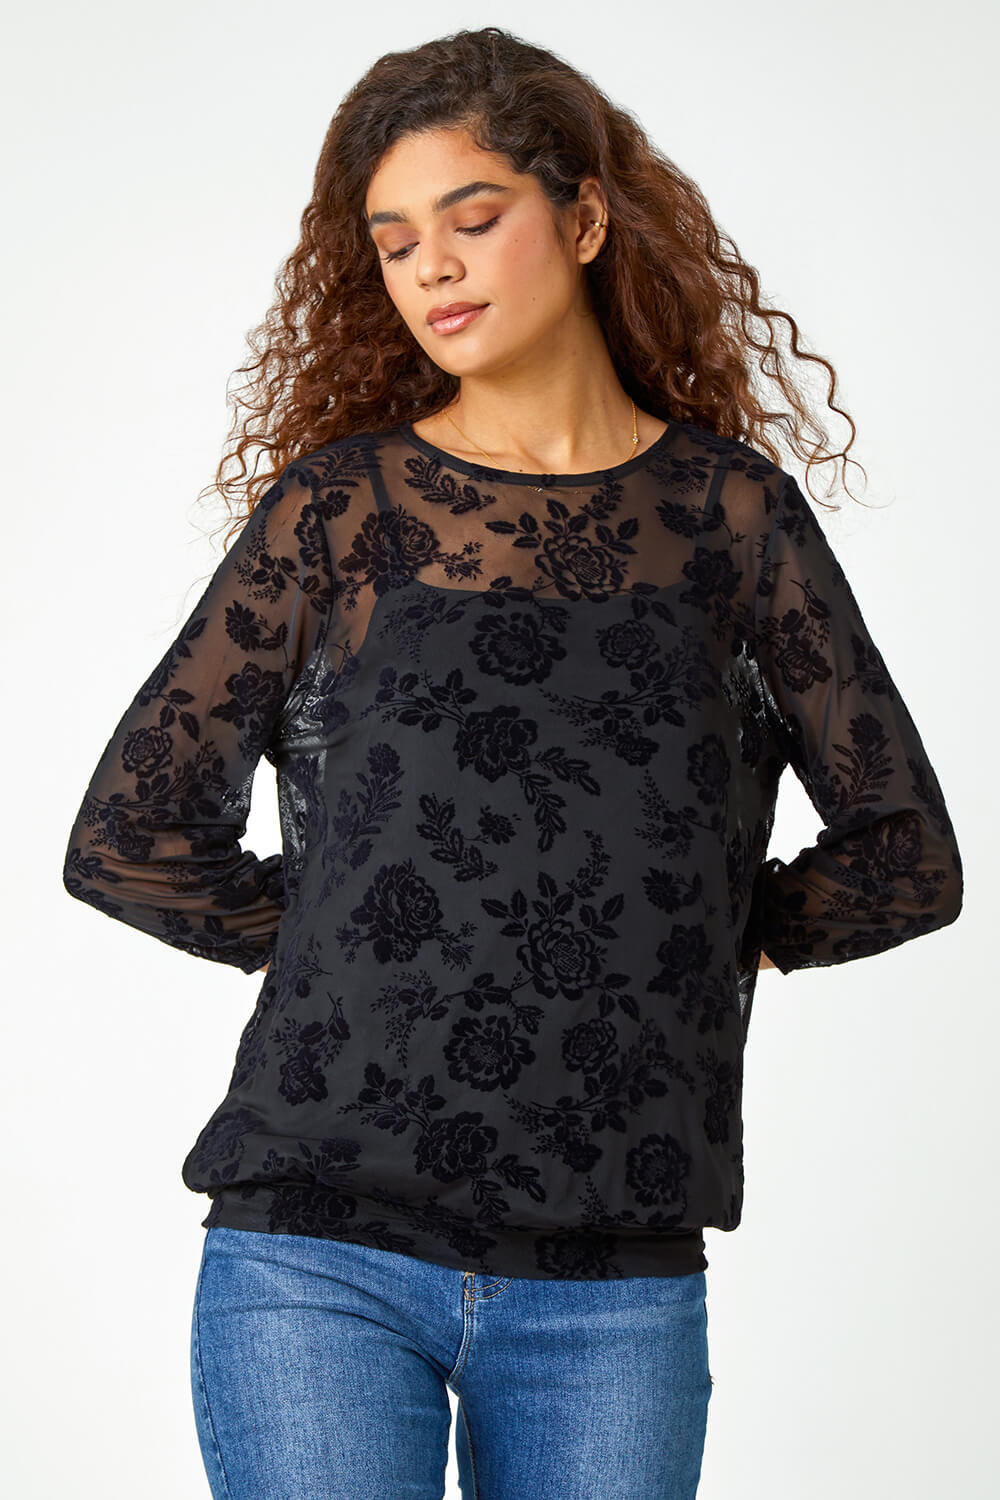 Textured Floral Print Mesh Stretch Top